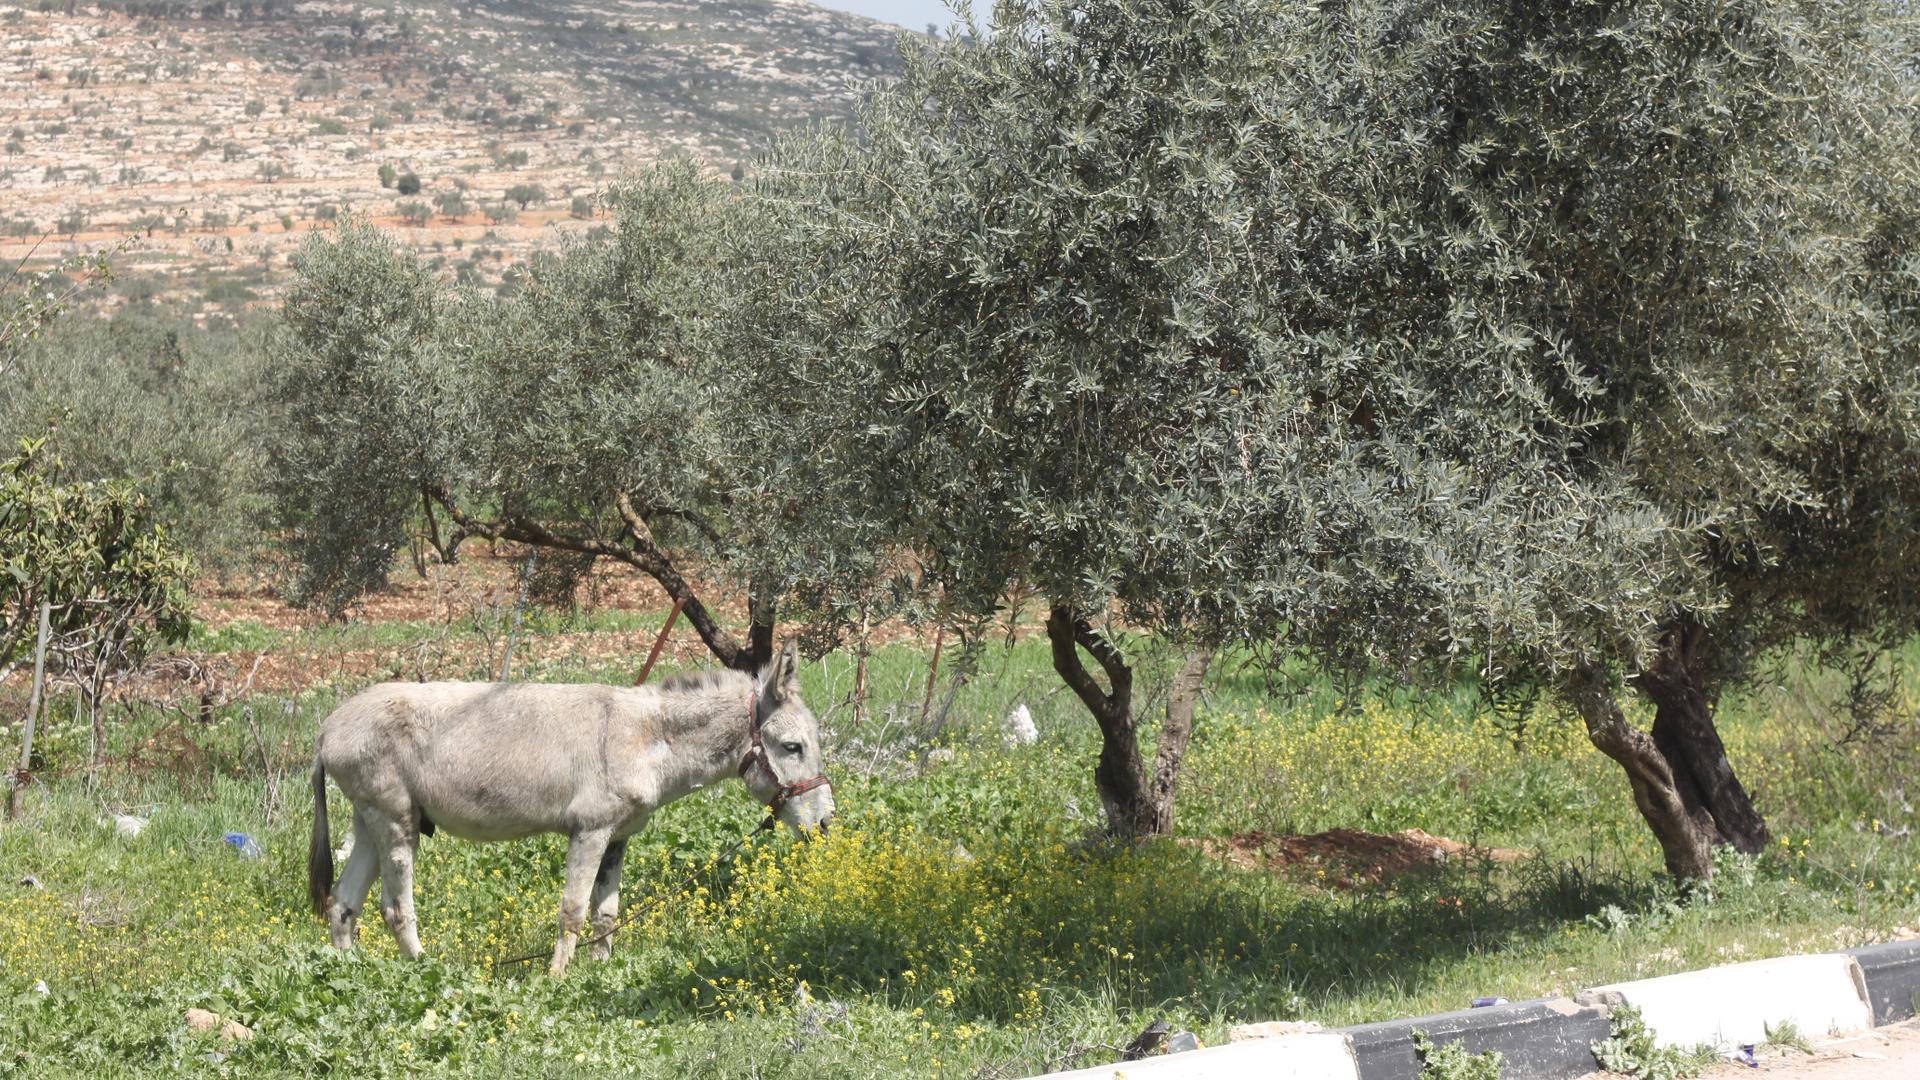 An Israeli settler tried to steal this mule from the Palestinian village of Luban.